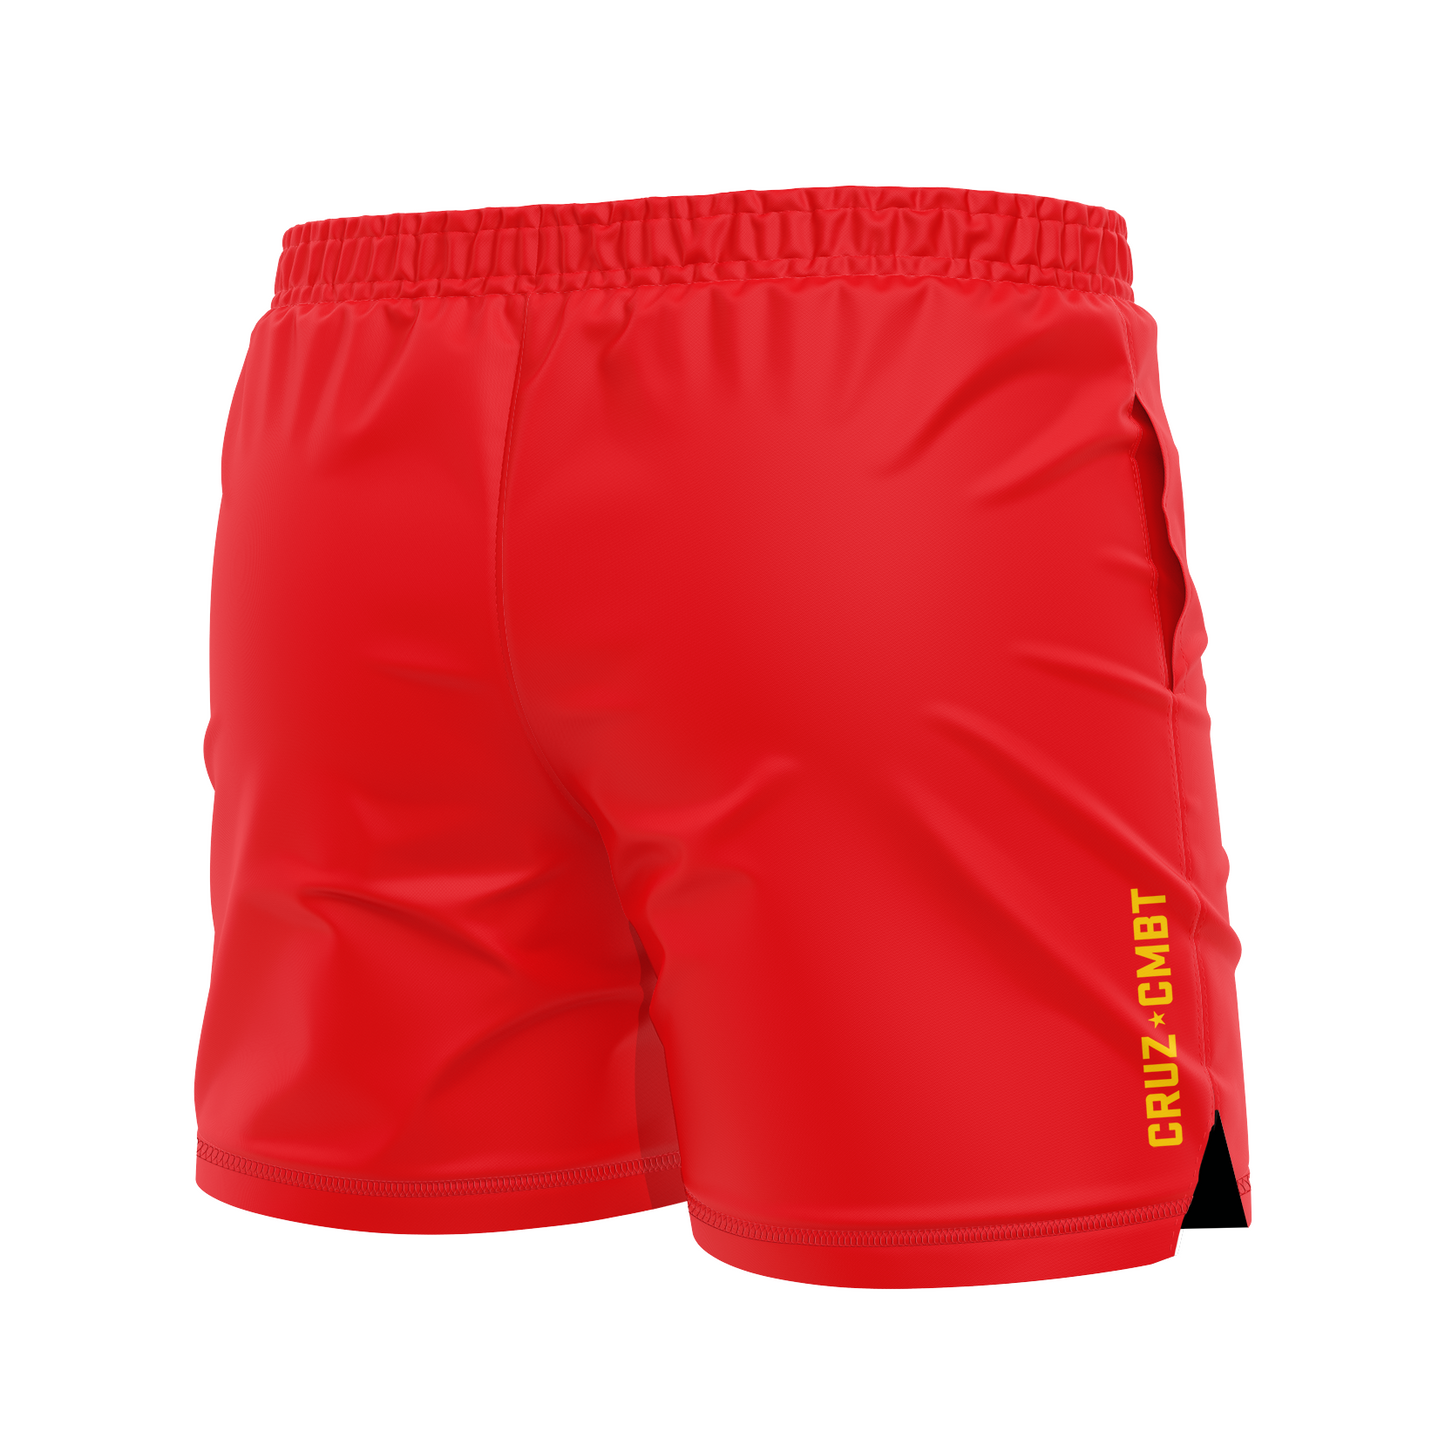 Base Collection men's FC shorts, red and athl. gold